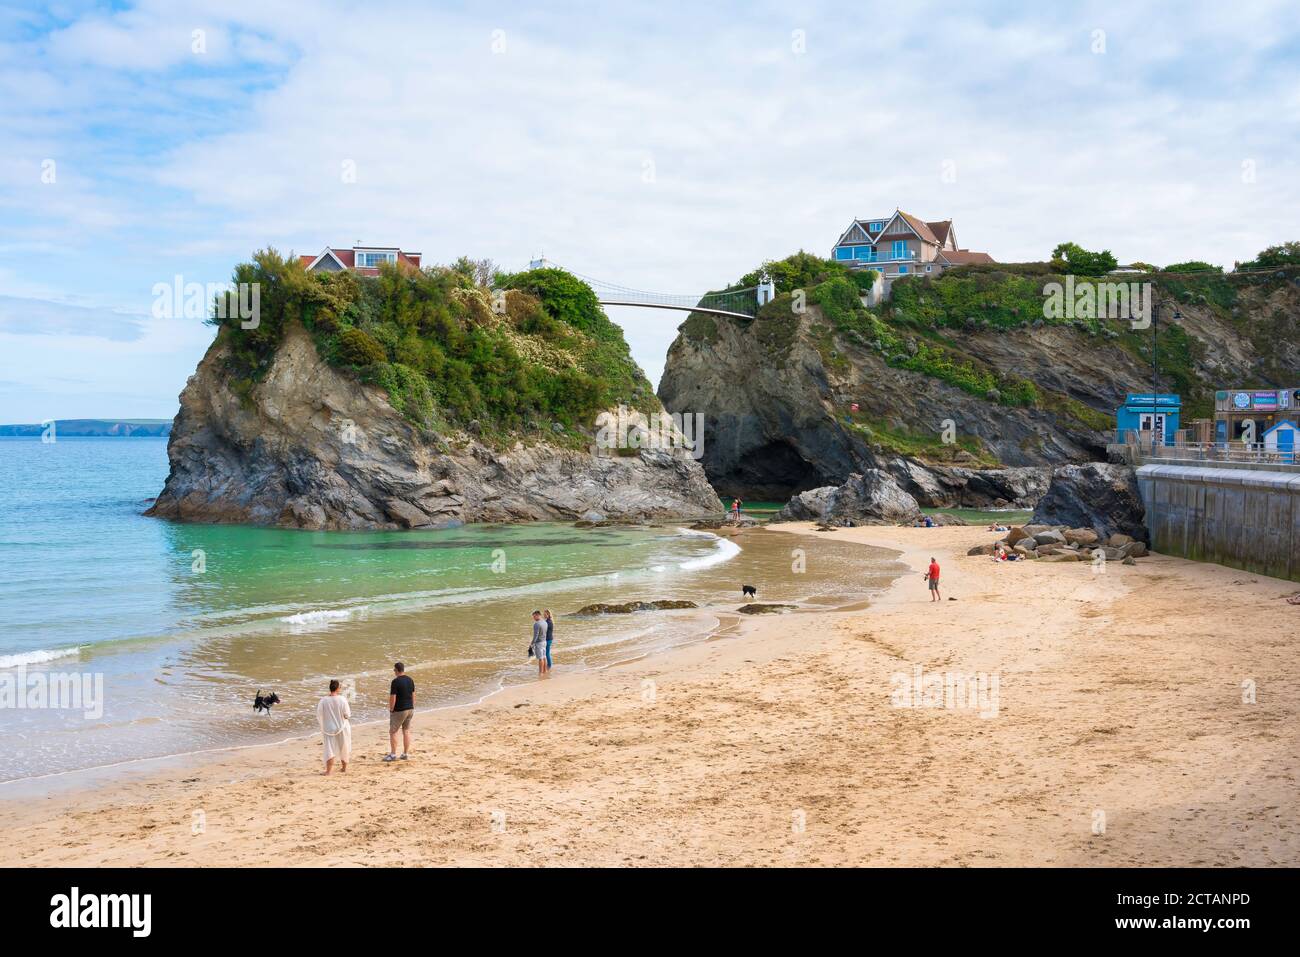 Cornwall Uk beach, view of people relaxing on Towan Beach in Newquay, Cornwall, south west England, UK Stock Photo